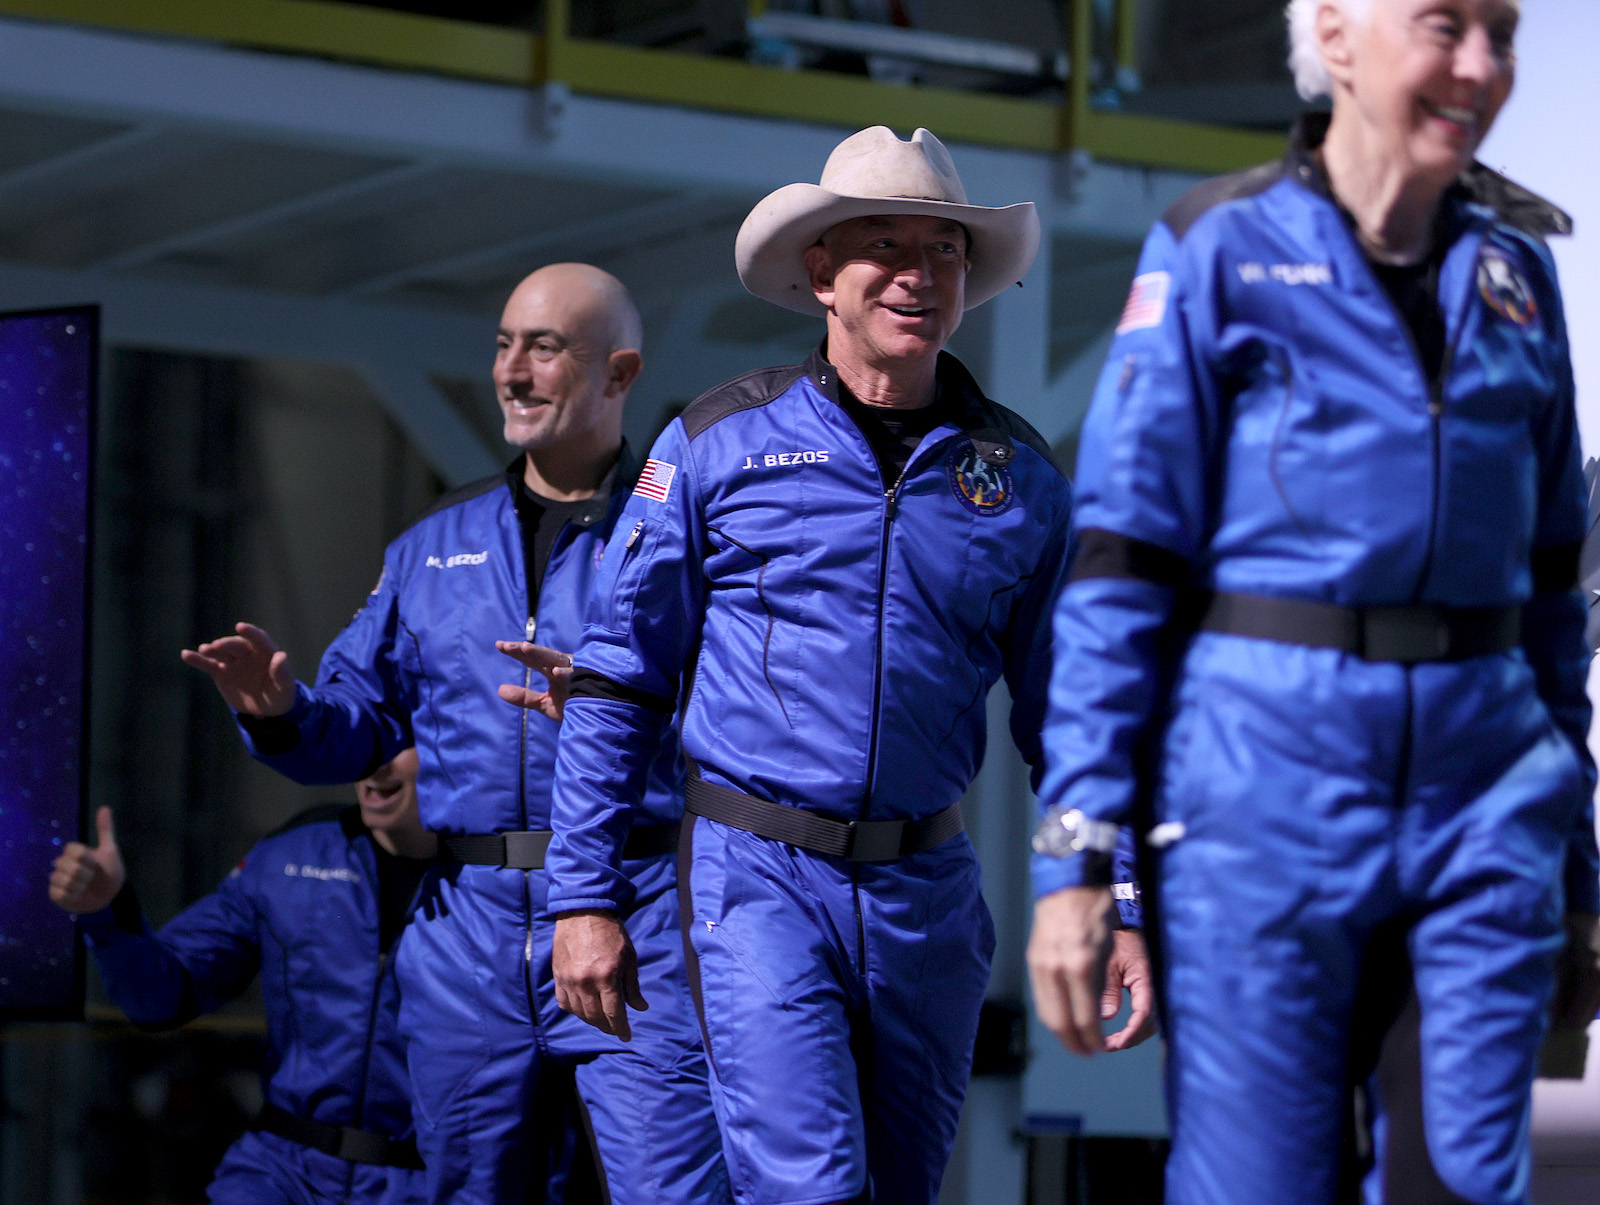 a line of people in blue jumpsuits and the center man has a white cowboy hat